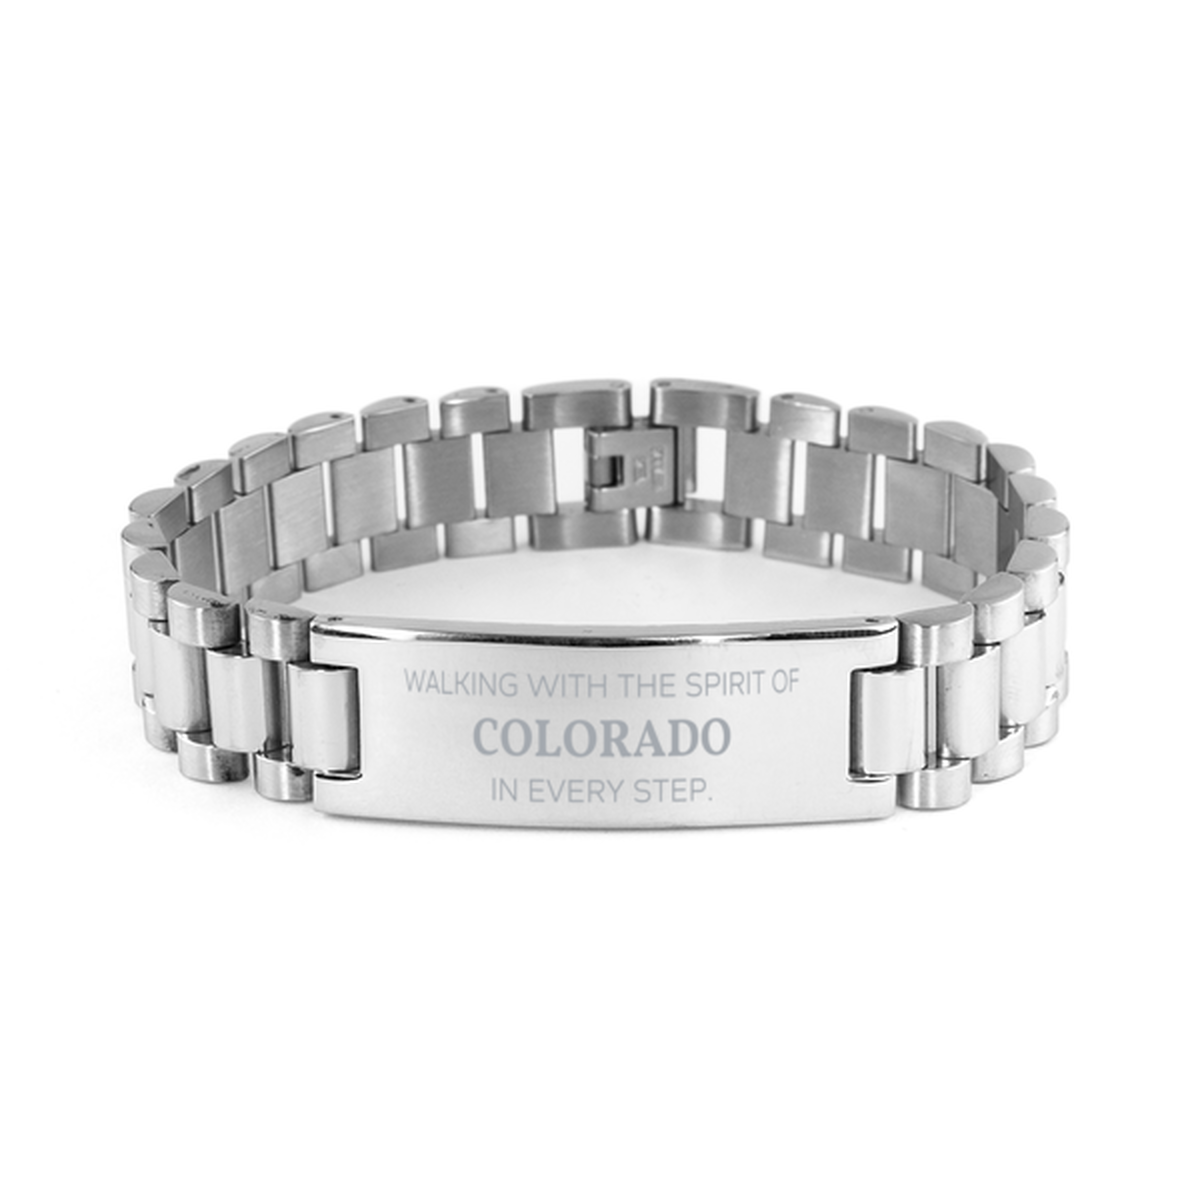 Colorado Gifts, Walking with the spirit, Love Colorado Birthday Christmas Ladder Stainless Steel Bracelet For Colorado People, Men, Women, Friends